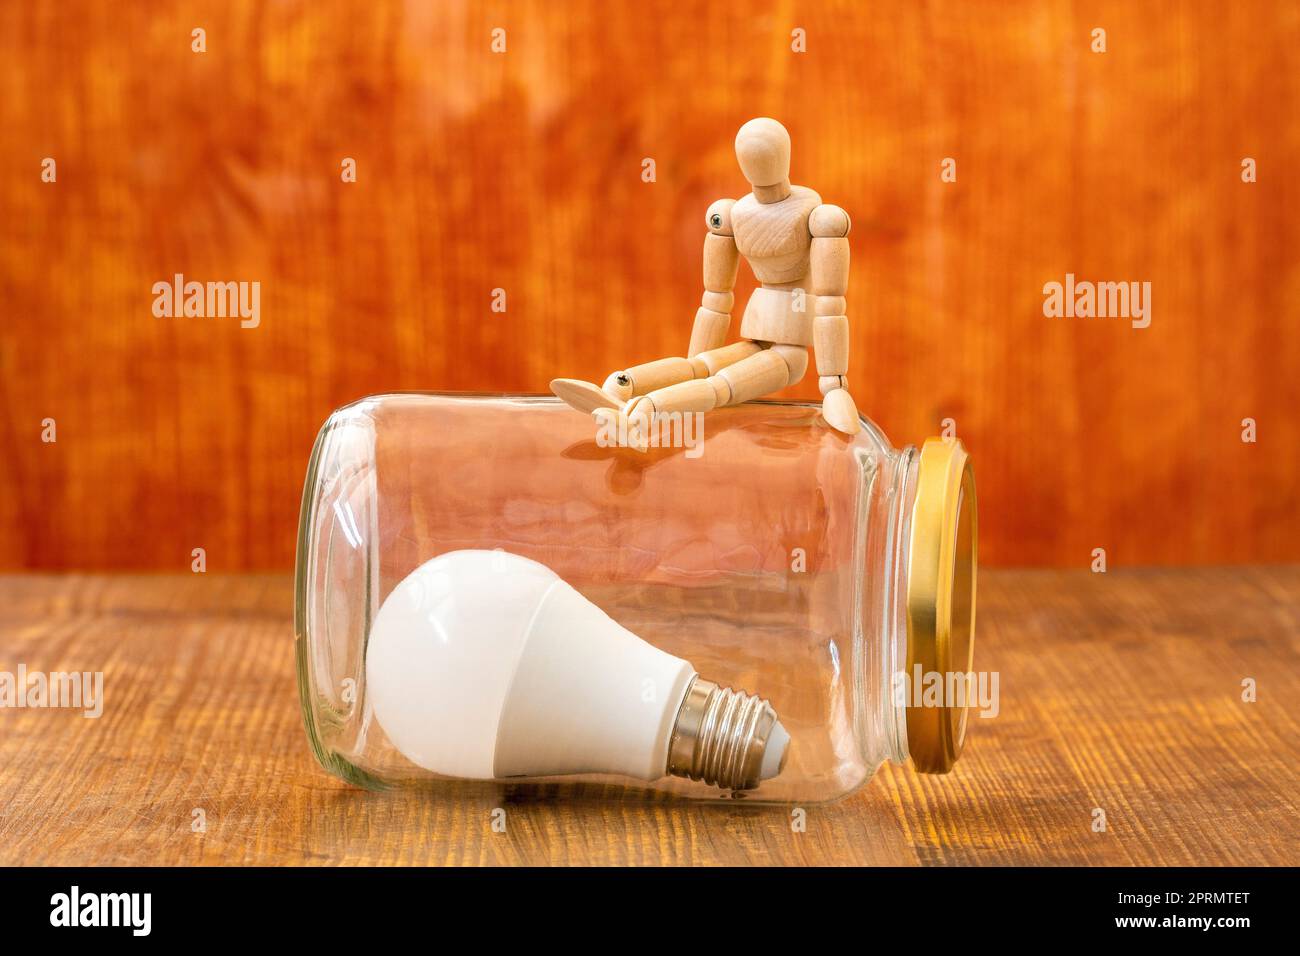 Wooden mannequin sitting on the glass jar with a lightbulb inside Stock Photo